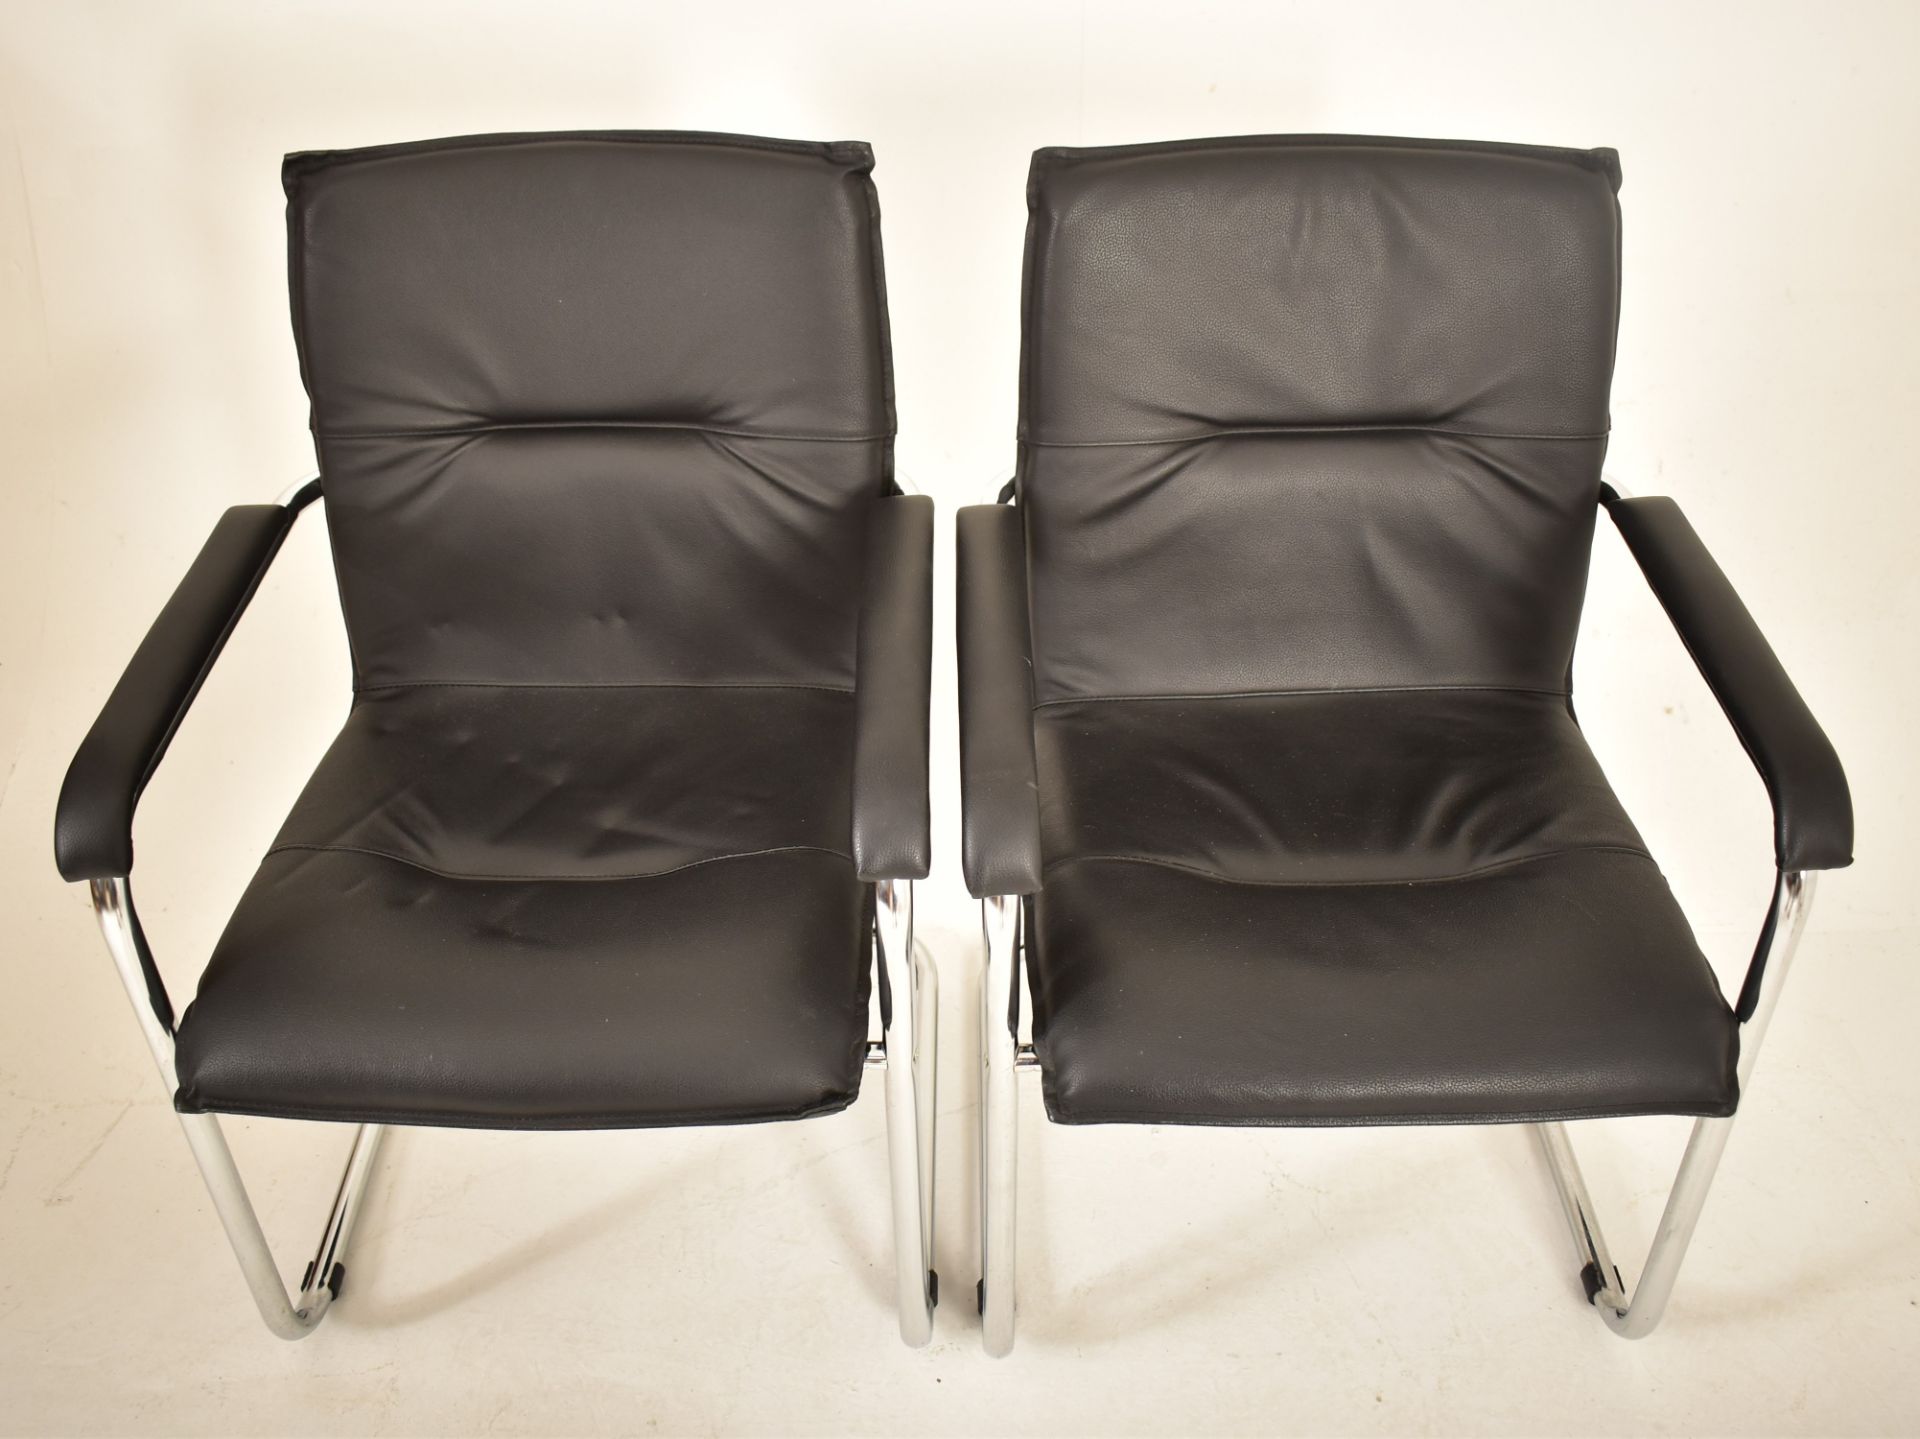 IN THE MANNER OF EAMES - PAIR OF 20TH CENTURY OFFICE DESK CHAIRS - Image 2 of 6